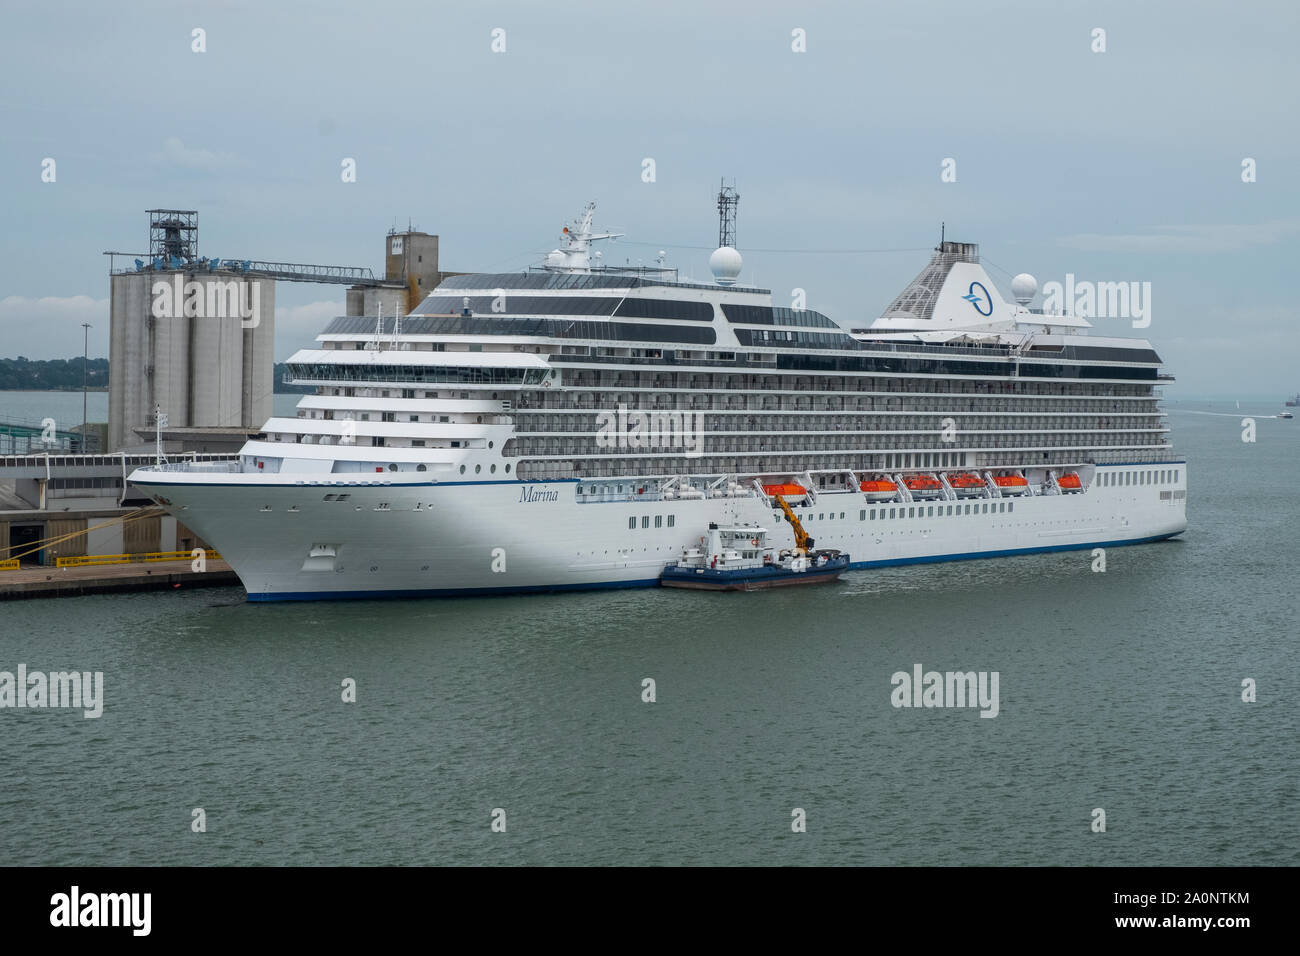 Cruise ship Marina (Majuro registered) in port at Southampton, UK, seen from the Queen Mary 2 Stock Photo